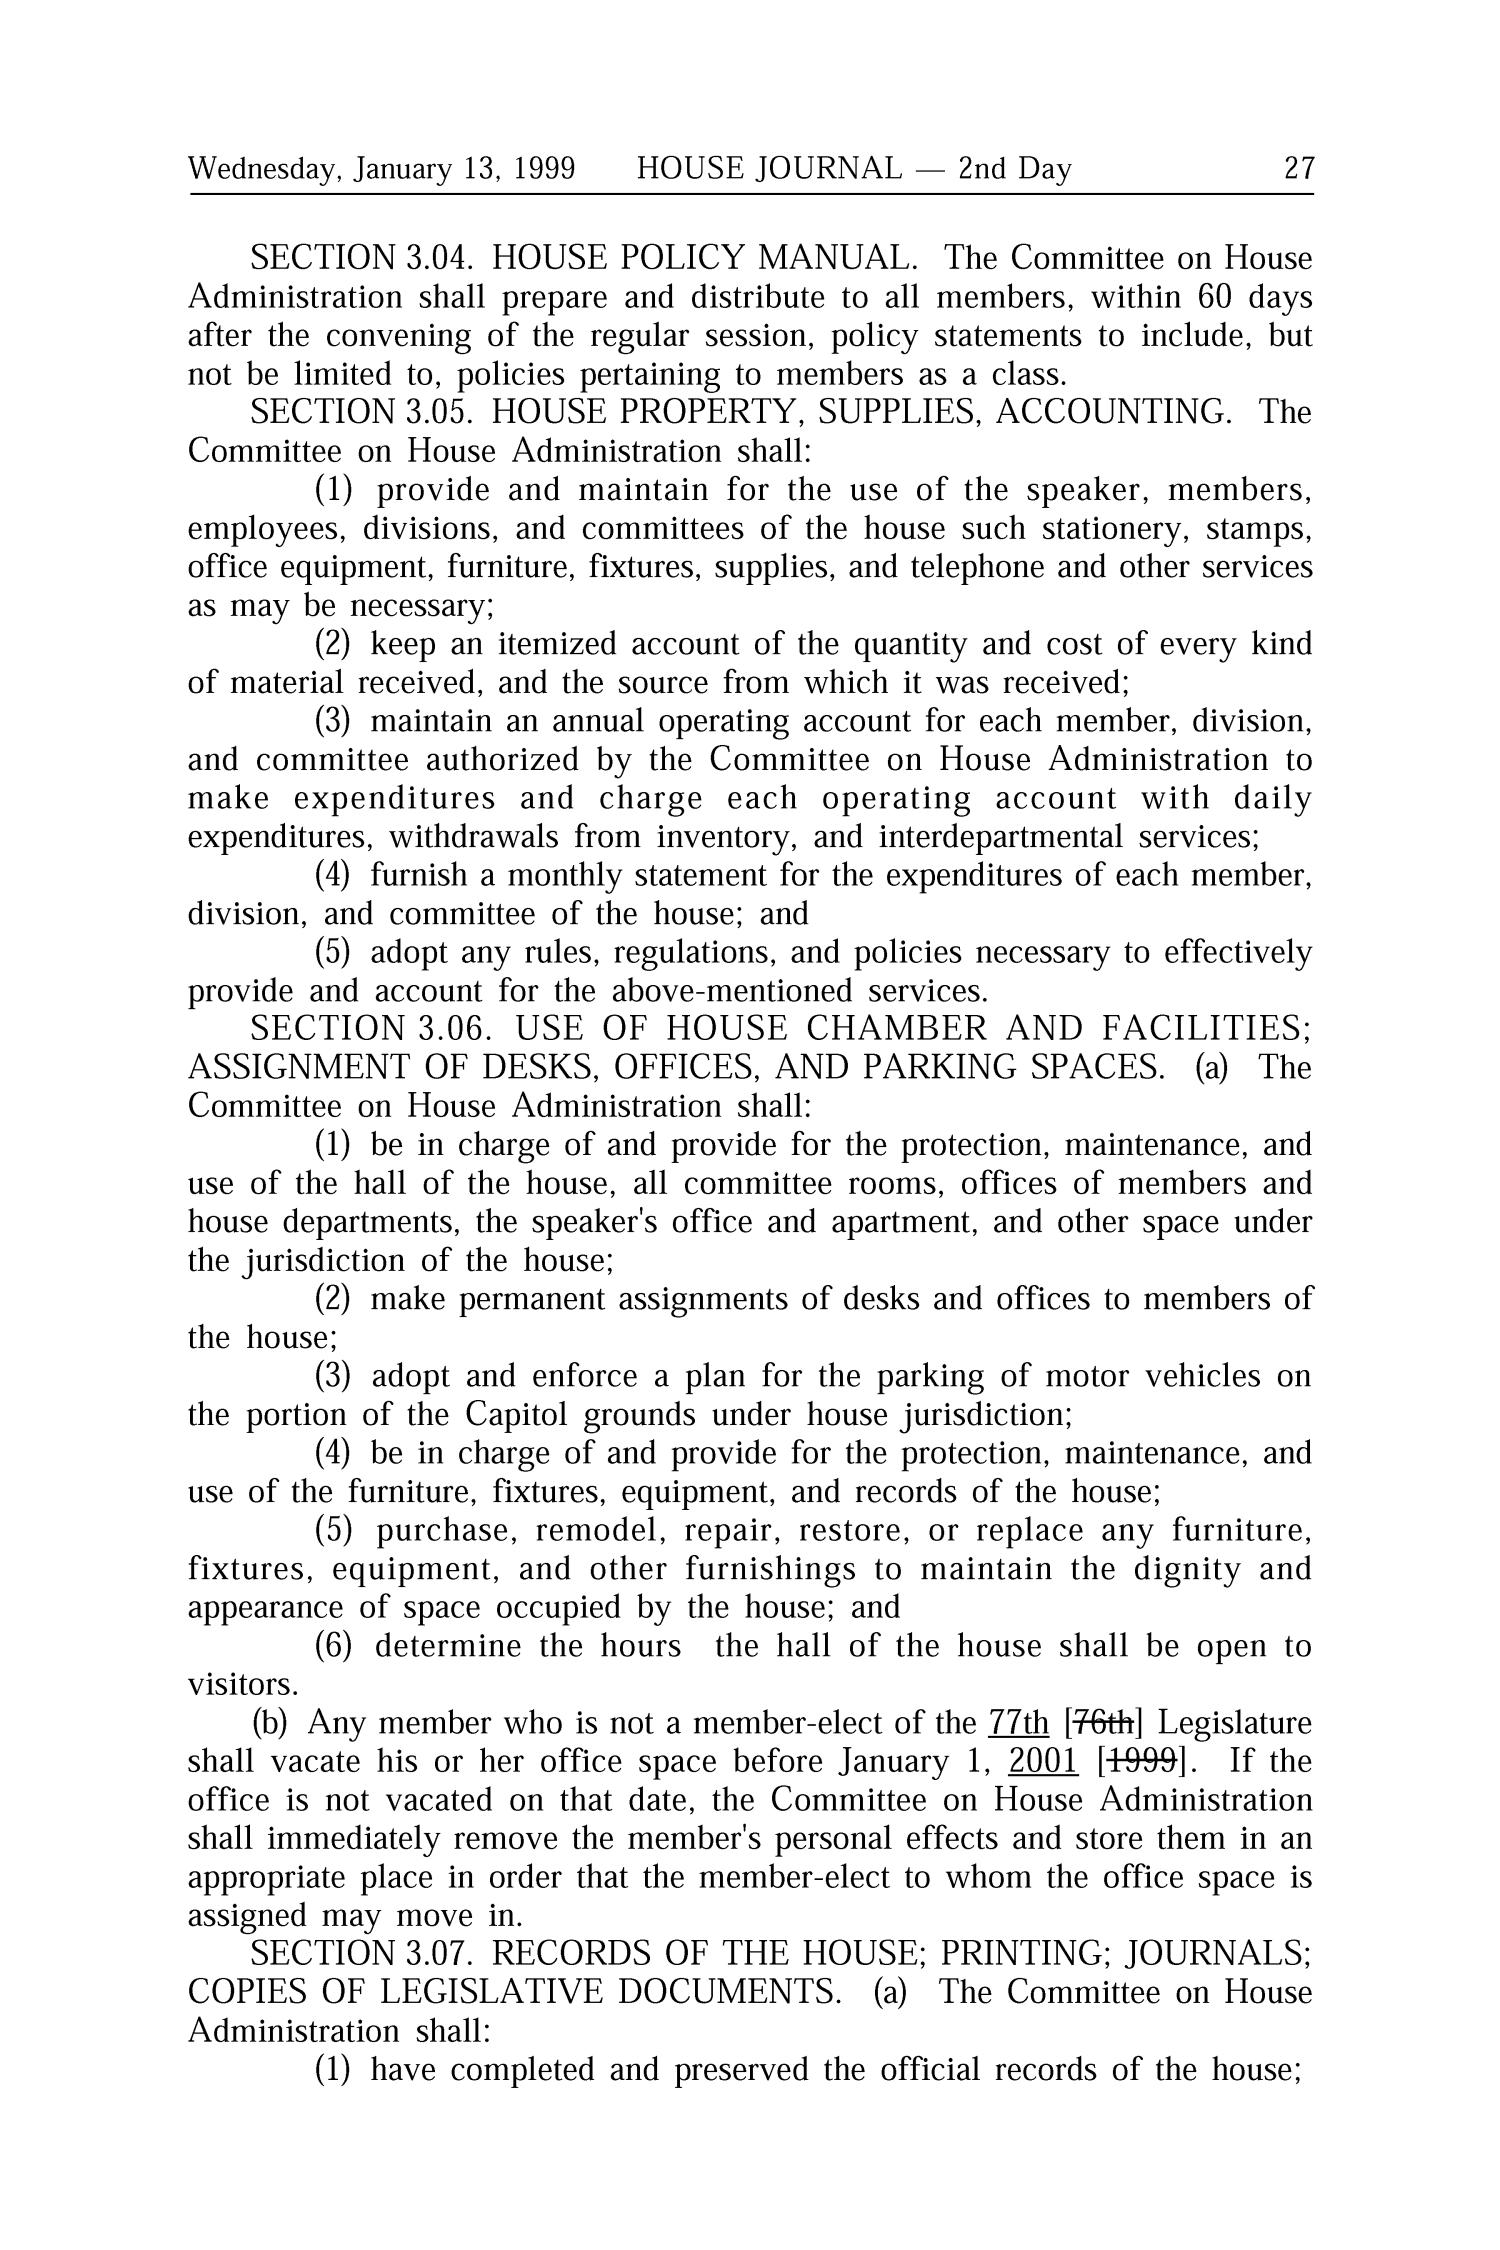 Journal of the House of Representatives of the Regular Session of the Seventy-Sixth Legislature of the State of Texas, Volume 1
                                                
                                                    27
                                                